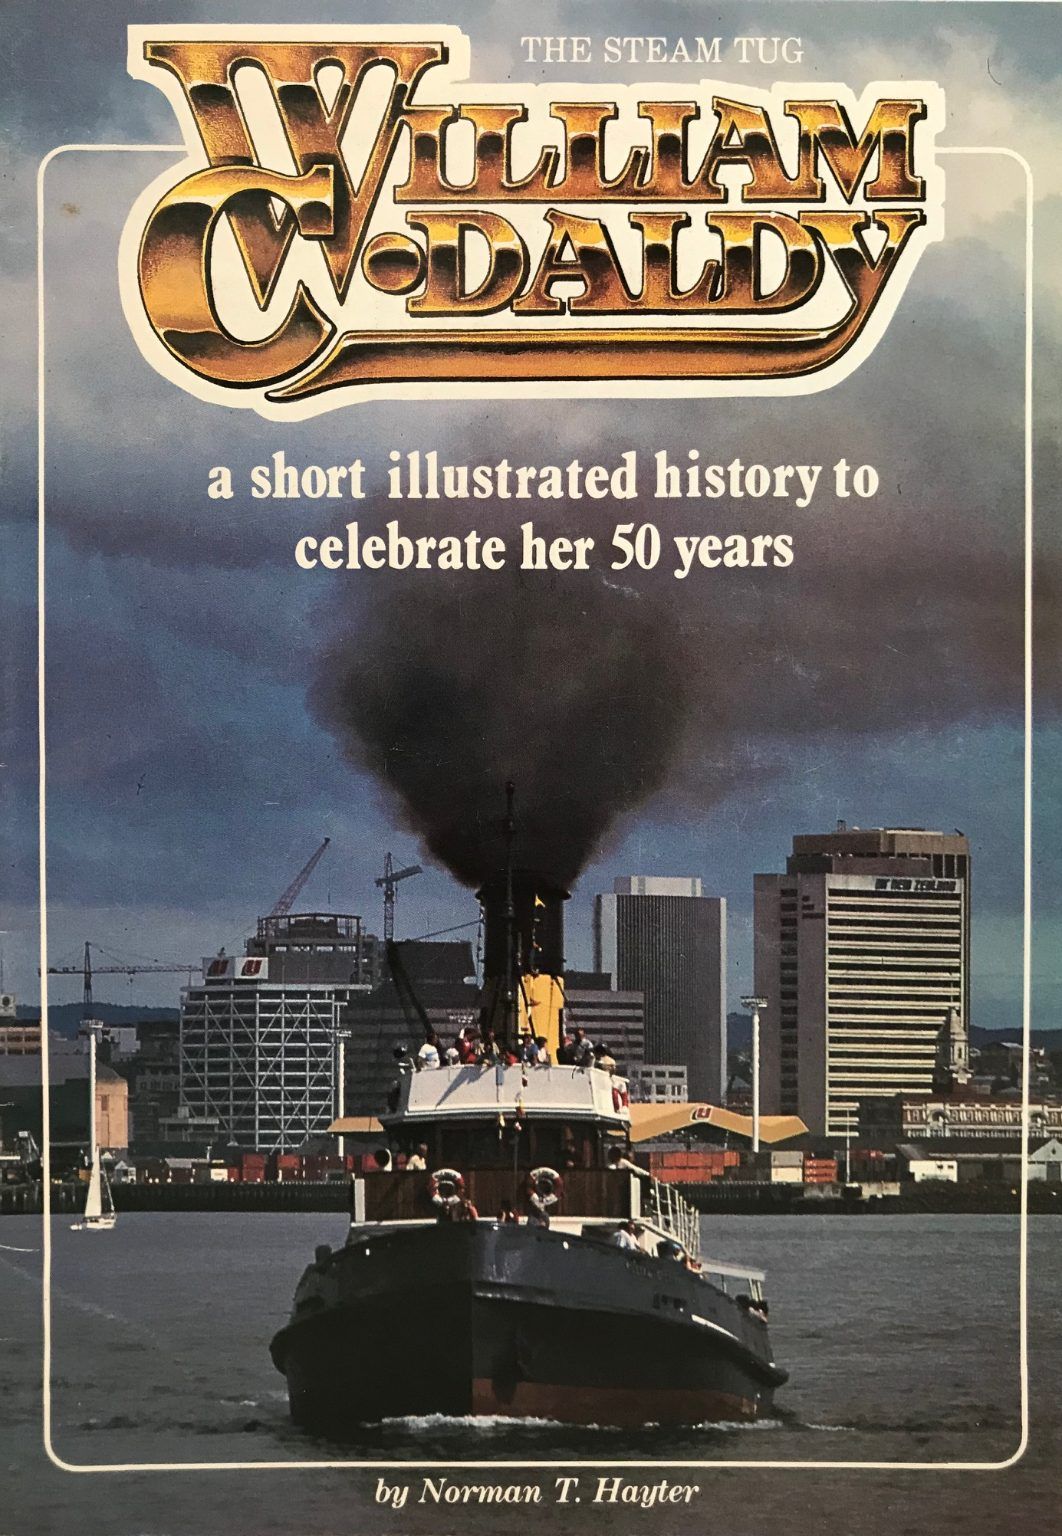 THE STEAM TUG: William C. Daldy - An Illustrated History to Celebrate 50 Years